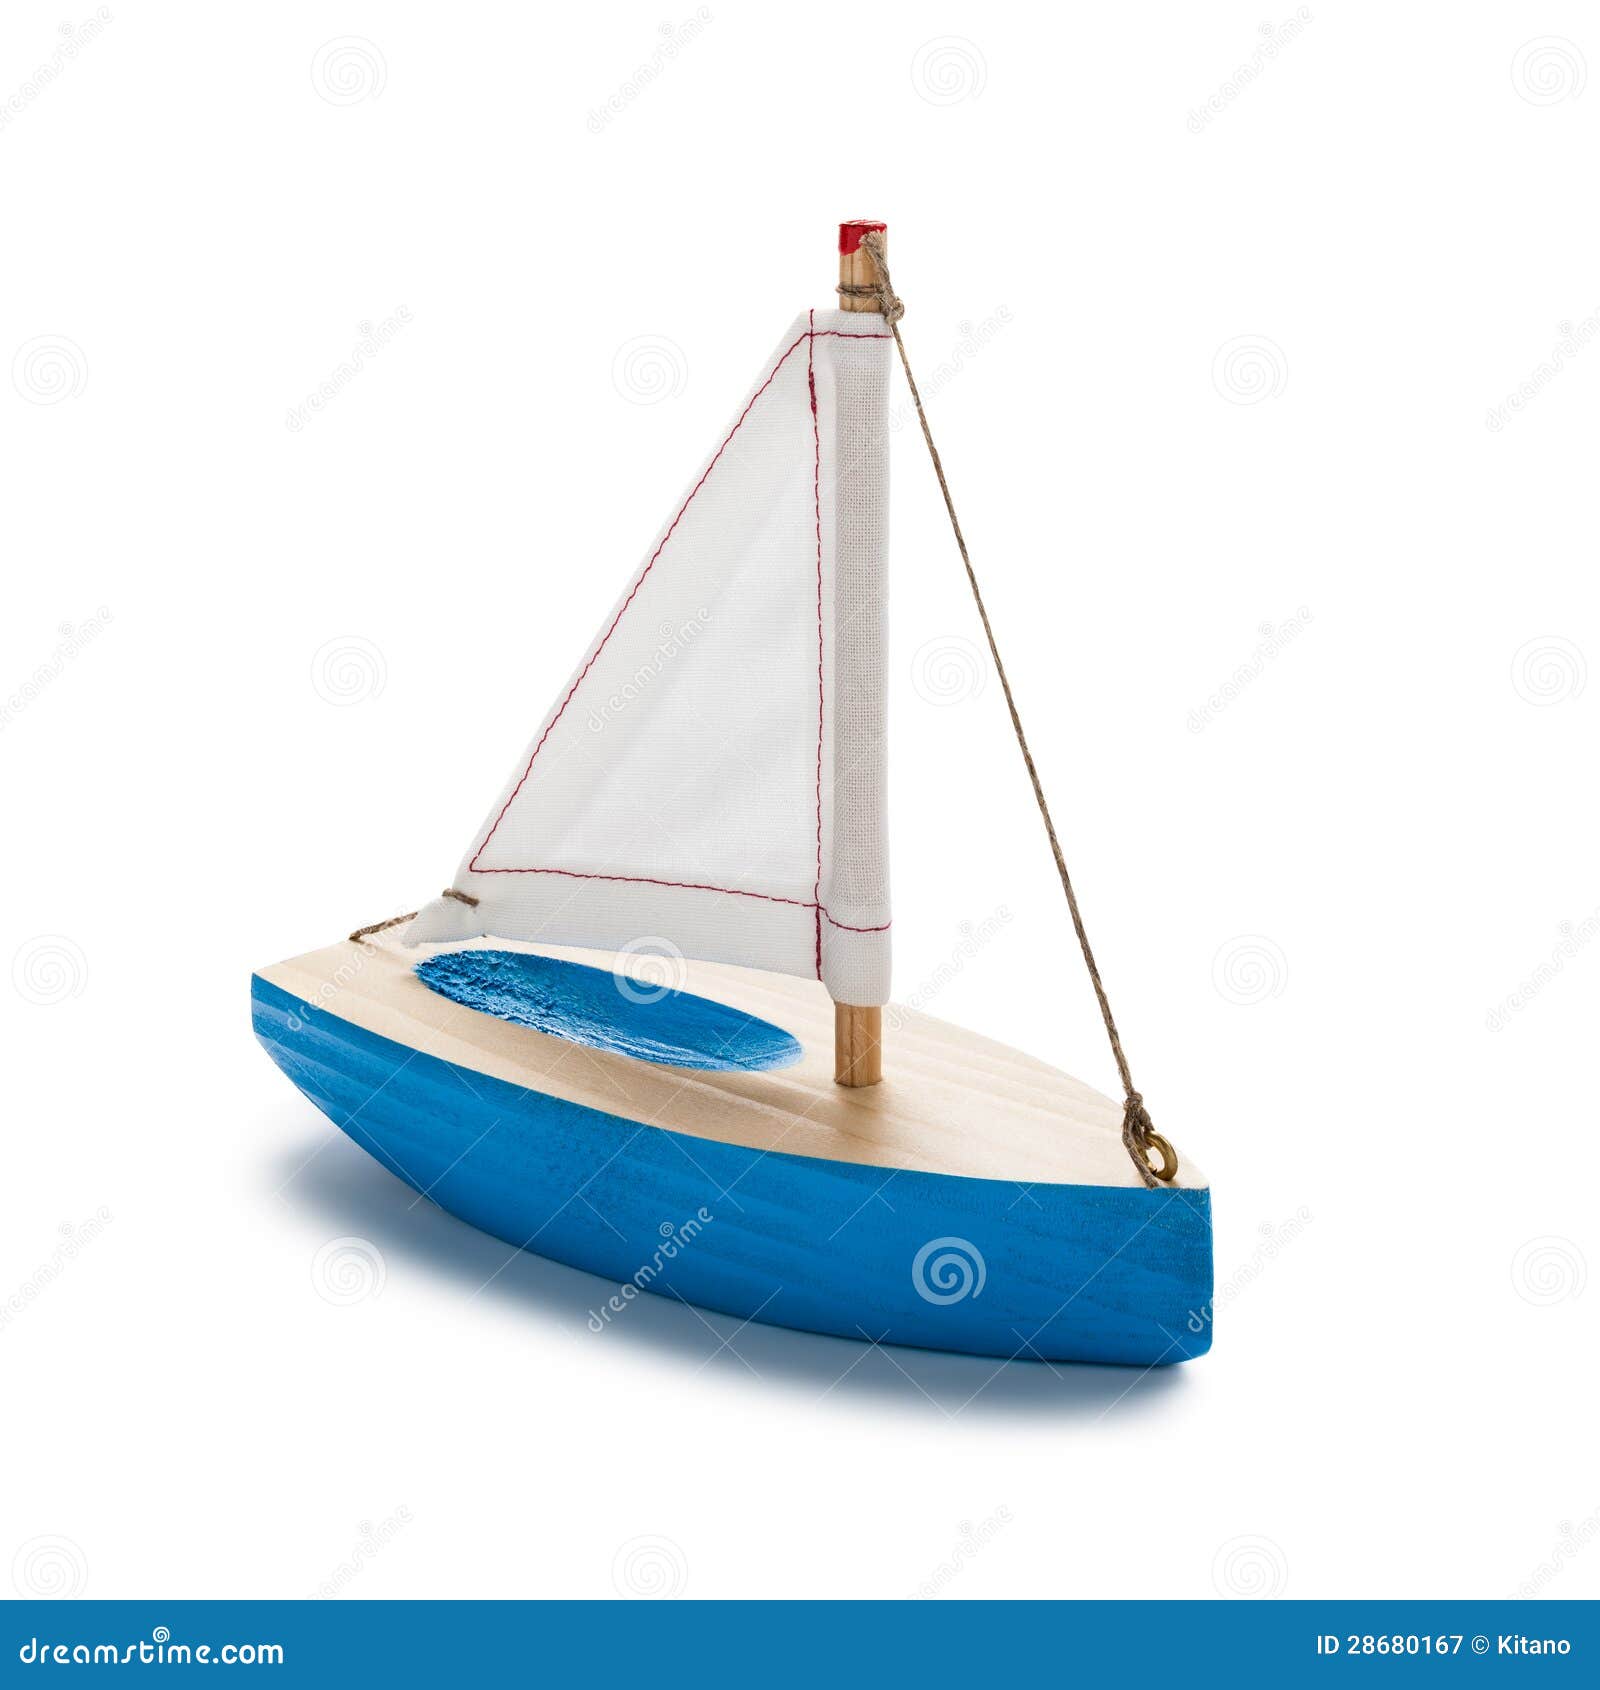 Little Toy Boat Royalty Free Stock Photography - Image: 28680167